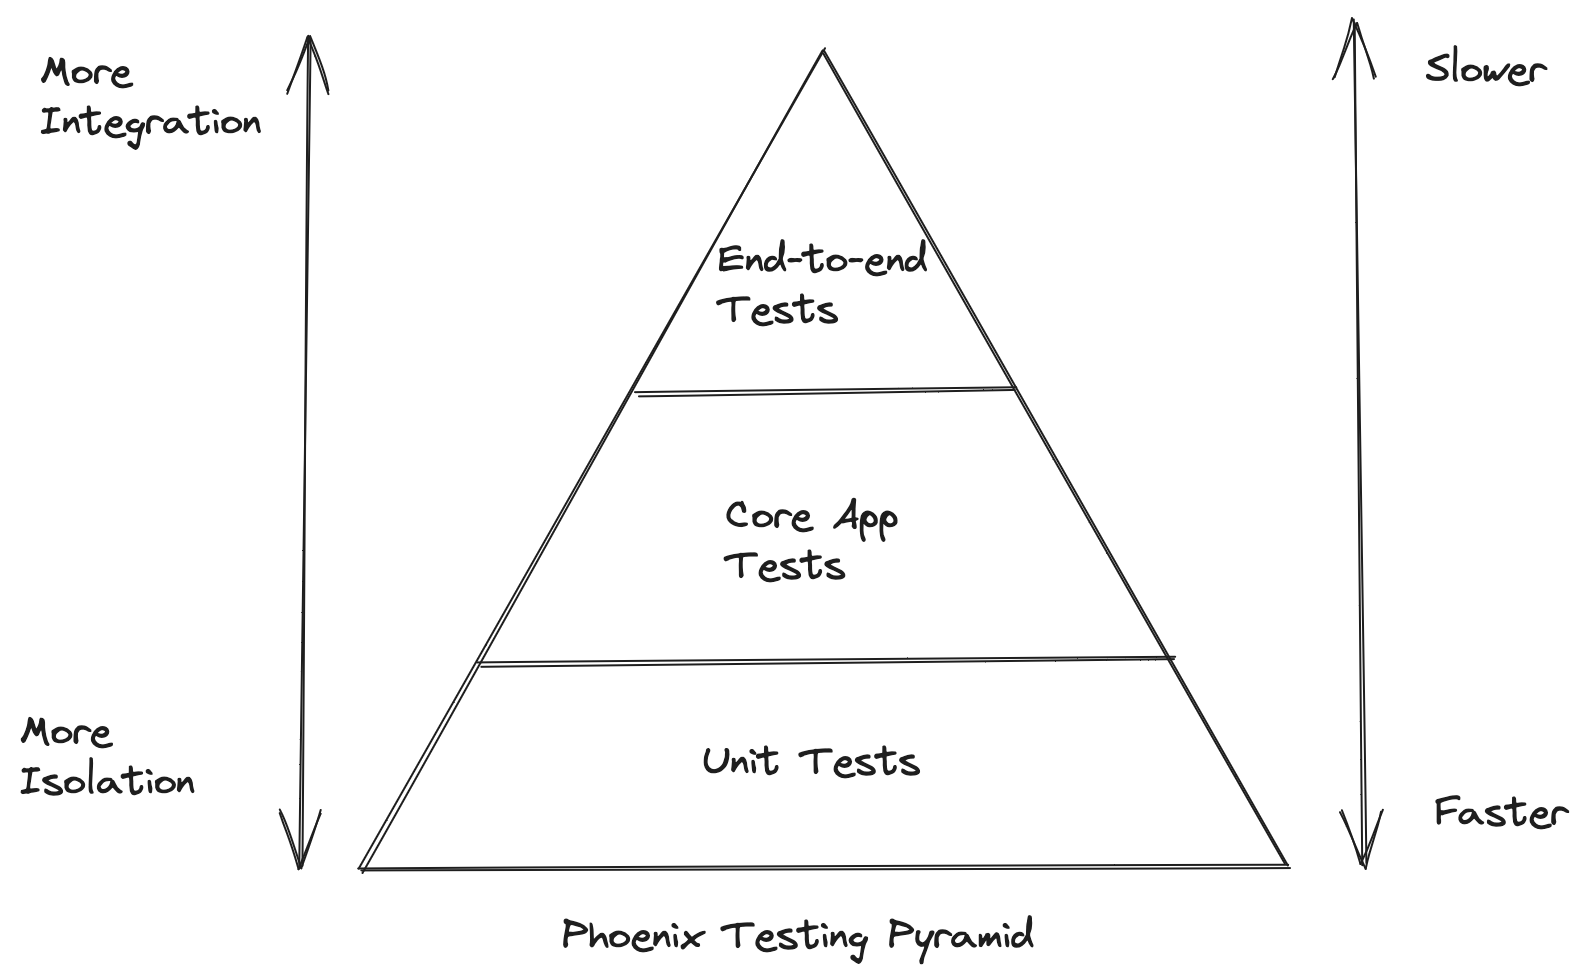 A pyramid with three levels. Top level: End-to-end tests. Middle level: Core app tests: Bottom level: Unit tests. Arrow on the left going from top to bottom. At the top it has more integration. At the bottom it has more isolation. Arrow on the right going from top to bottom. At the top slower. At the bottom faster.